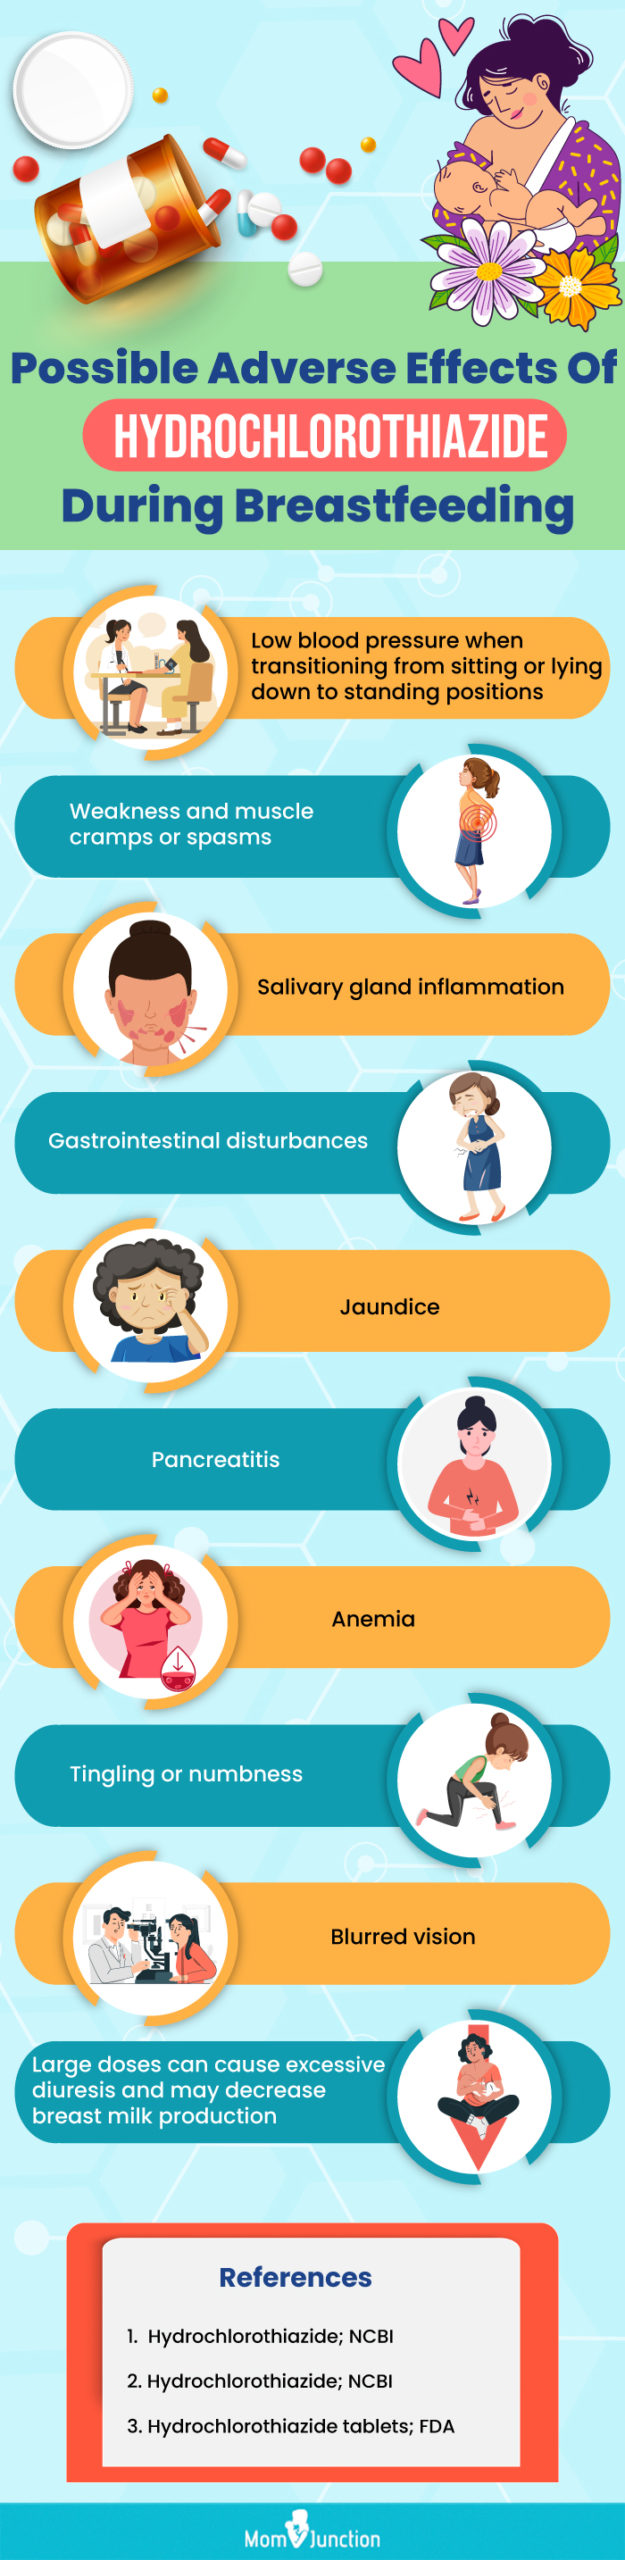 possible adverse effects of hydrochlorothiazide during breastfeeding (infographic)